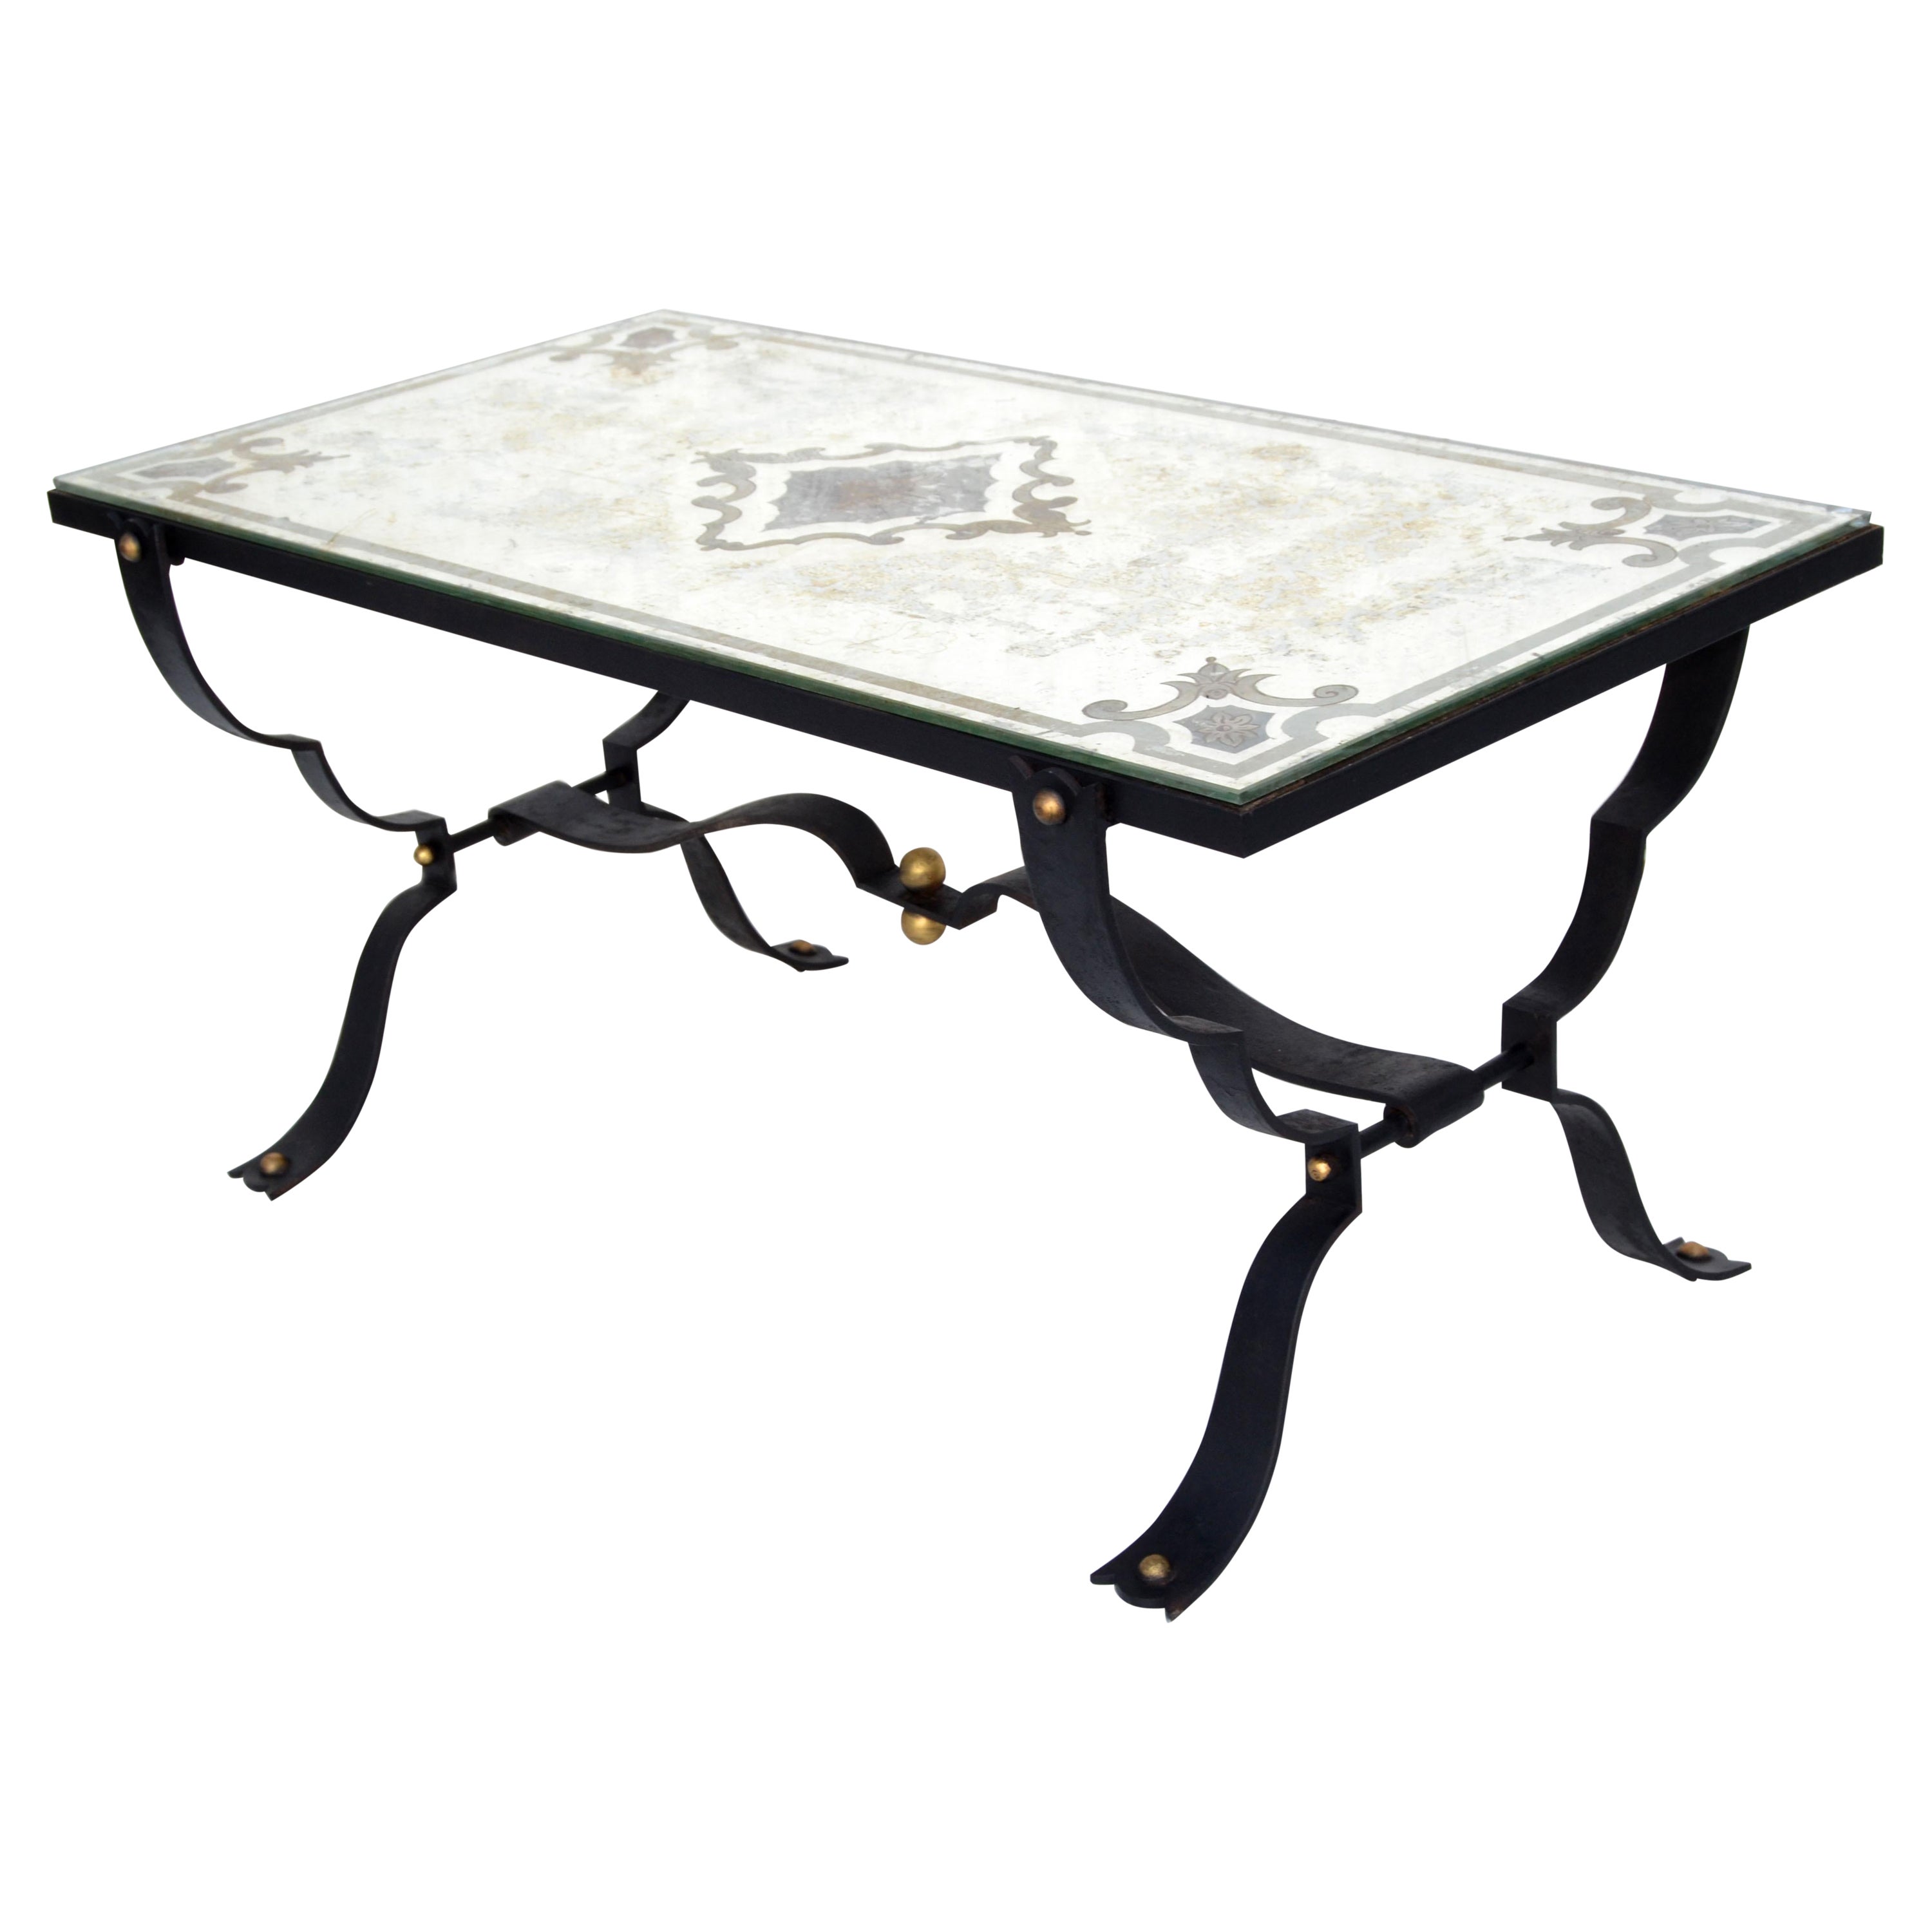 Jean-Charles Moreux Style Forged Iron Coffee Table Etched Mirrored Glass Top